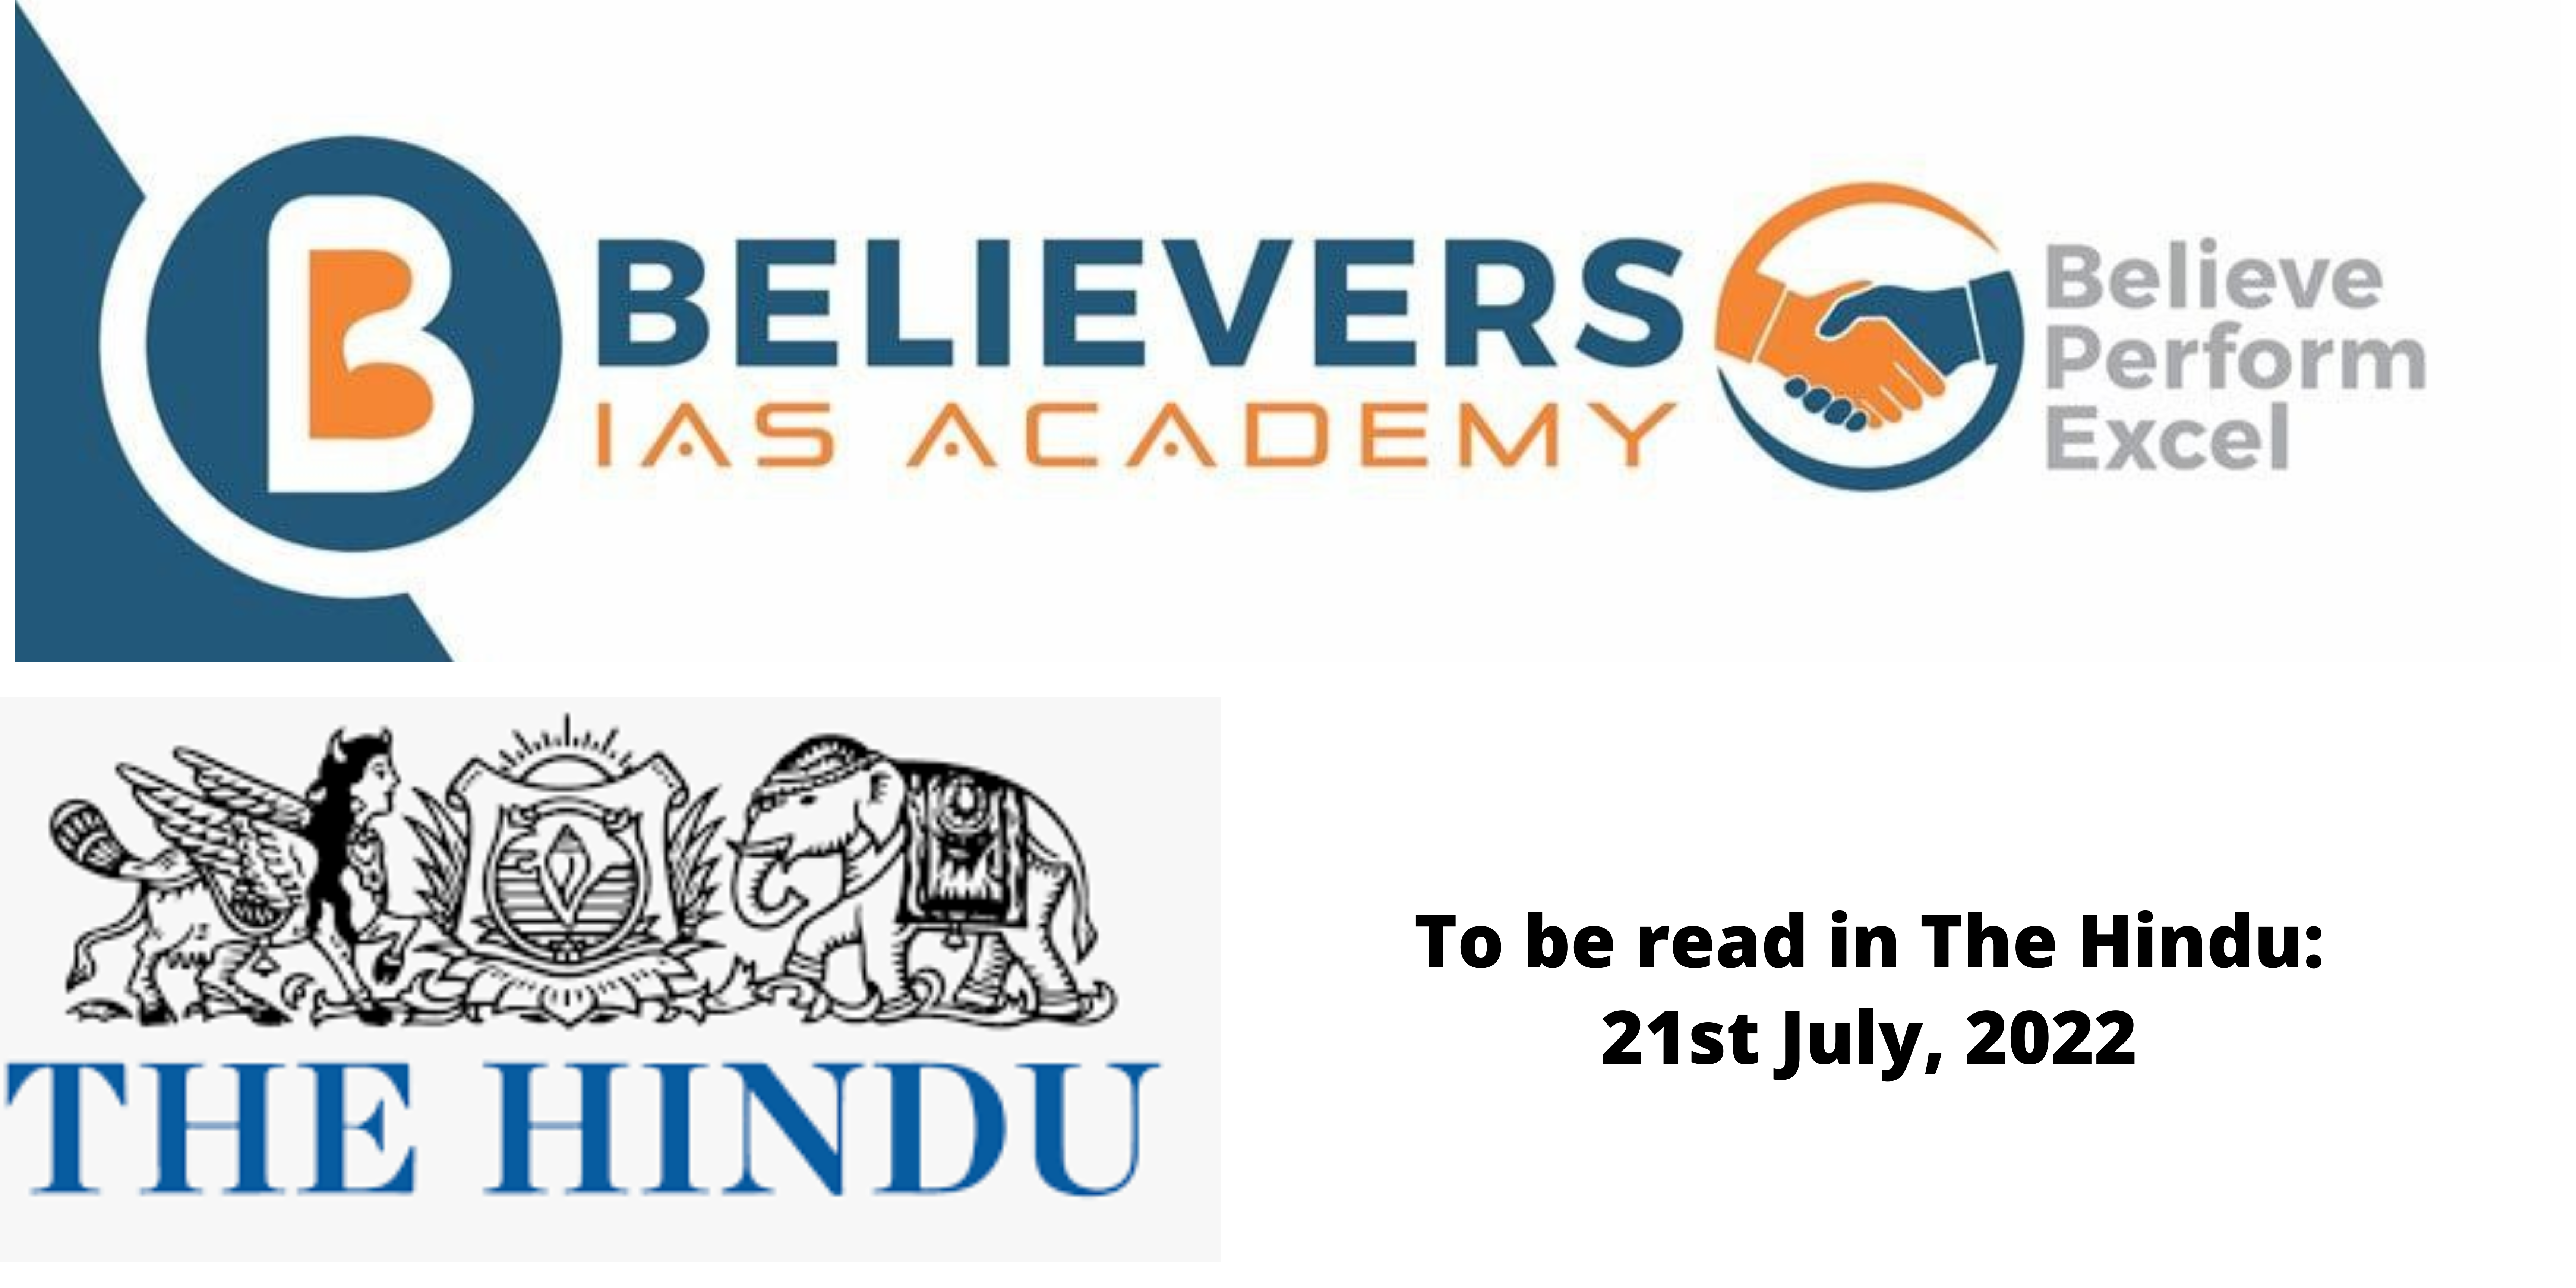 News articles for IAS Exam preparation - 21st July, 2022